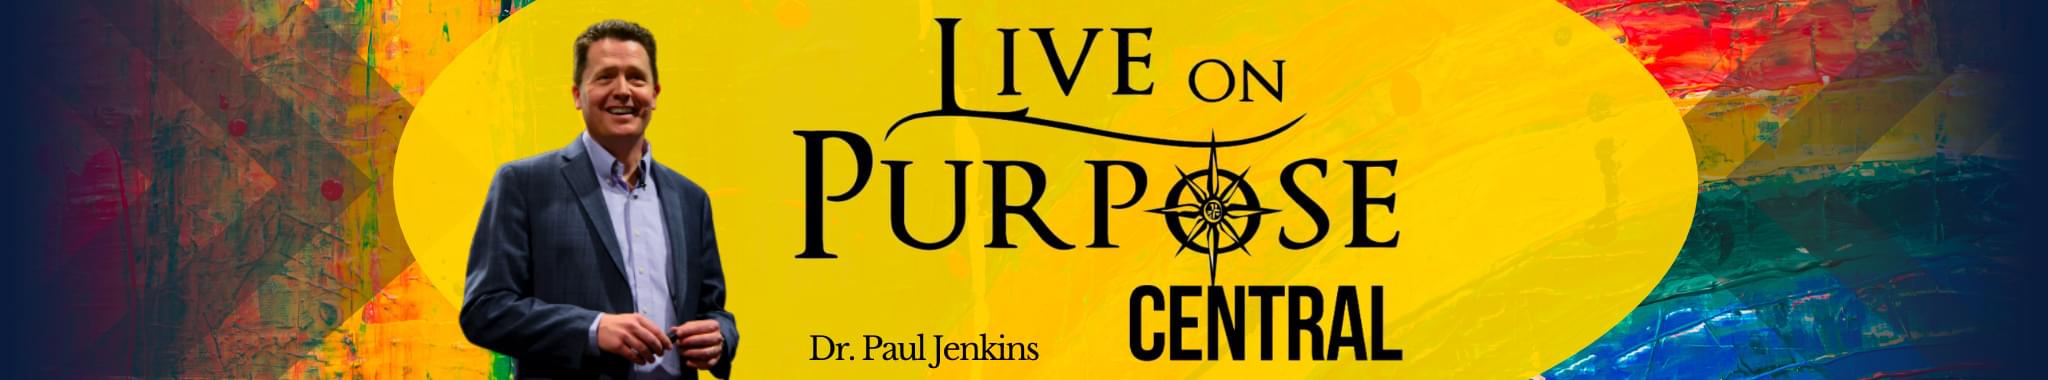 Live on Purpose Central